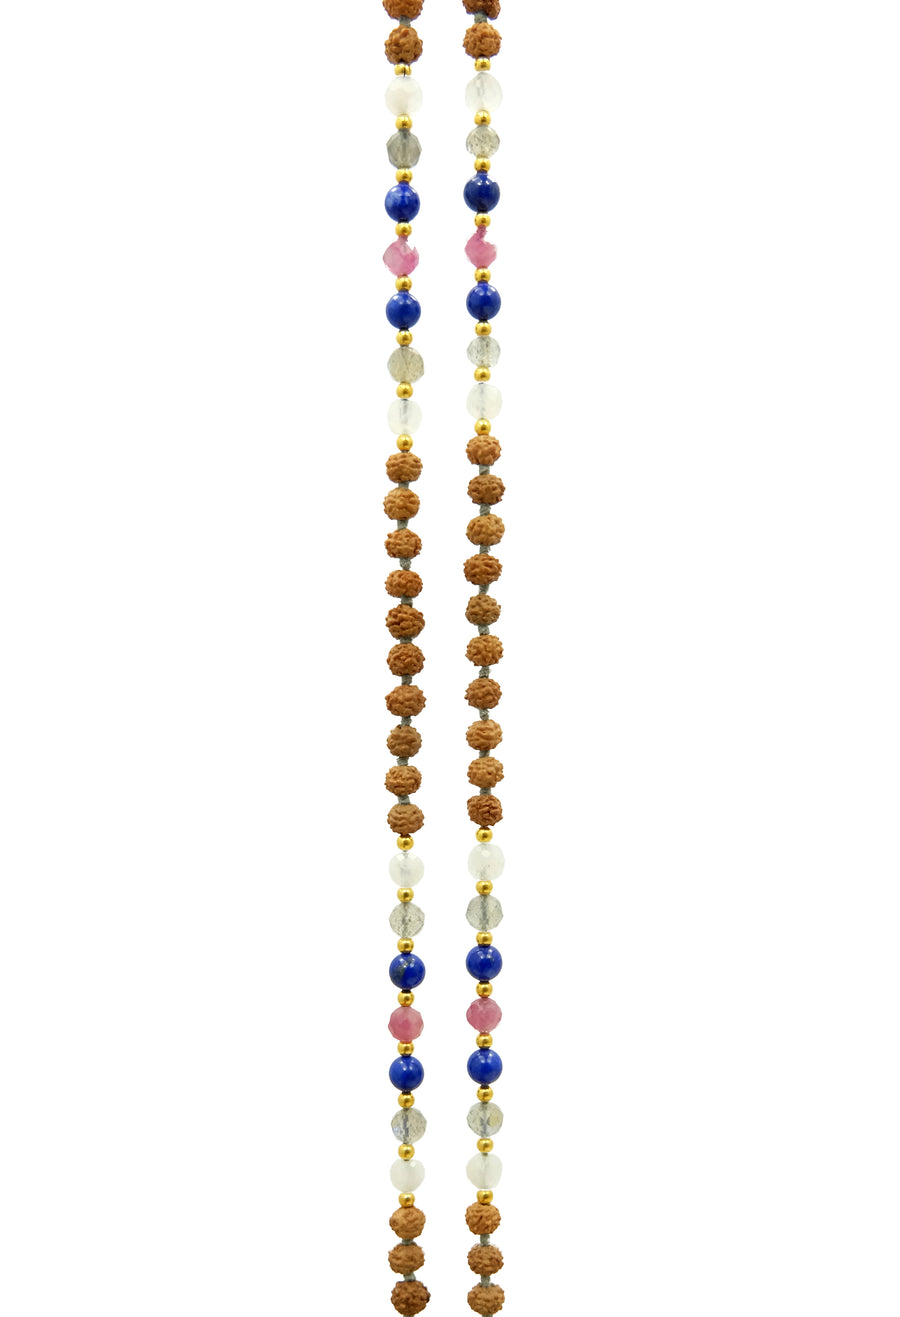 The Blue Moon Mala from balimalas.com is handcrafted with rudrani seeds, moonstone, labradorite and tourmaline gemstone with 22k gold accents.